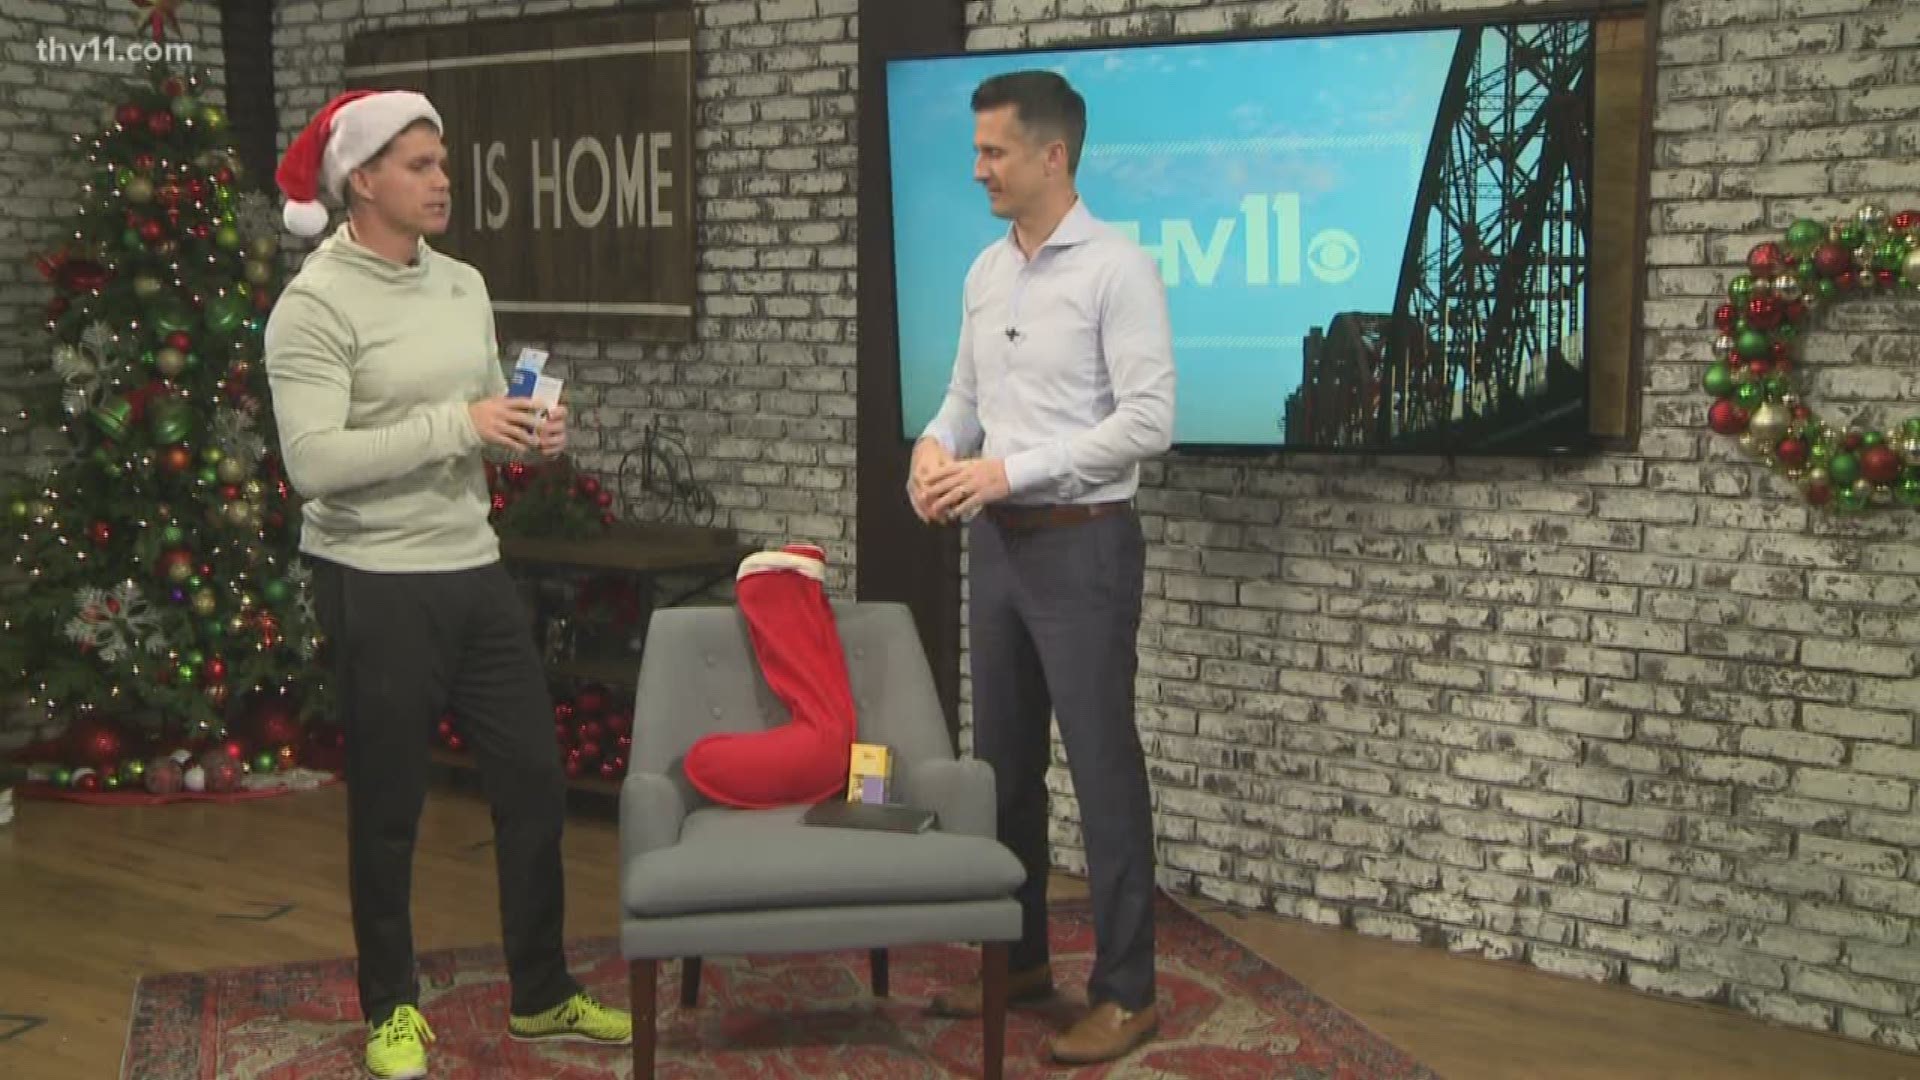 Jeff McDaniel has some ideas for stocking stuffers to help you stay slim after the holidays.